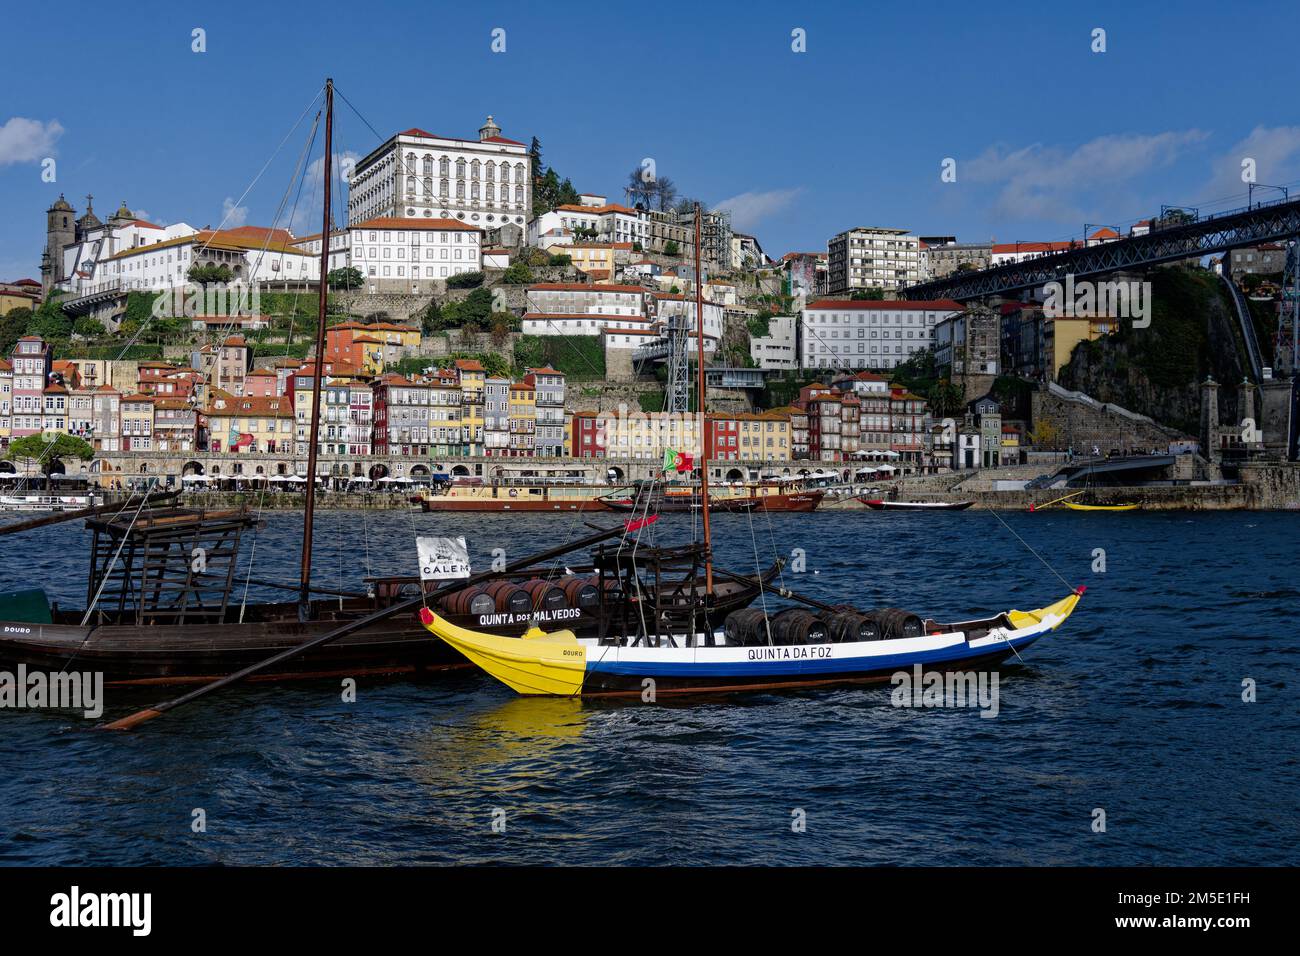 Boats on the river Douro with barrels of port wine advertising Graham's and Calem  Porto, Portugal, Europe and the old town in the background. Stock Photo